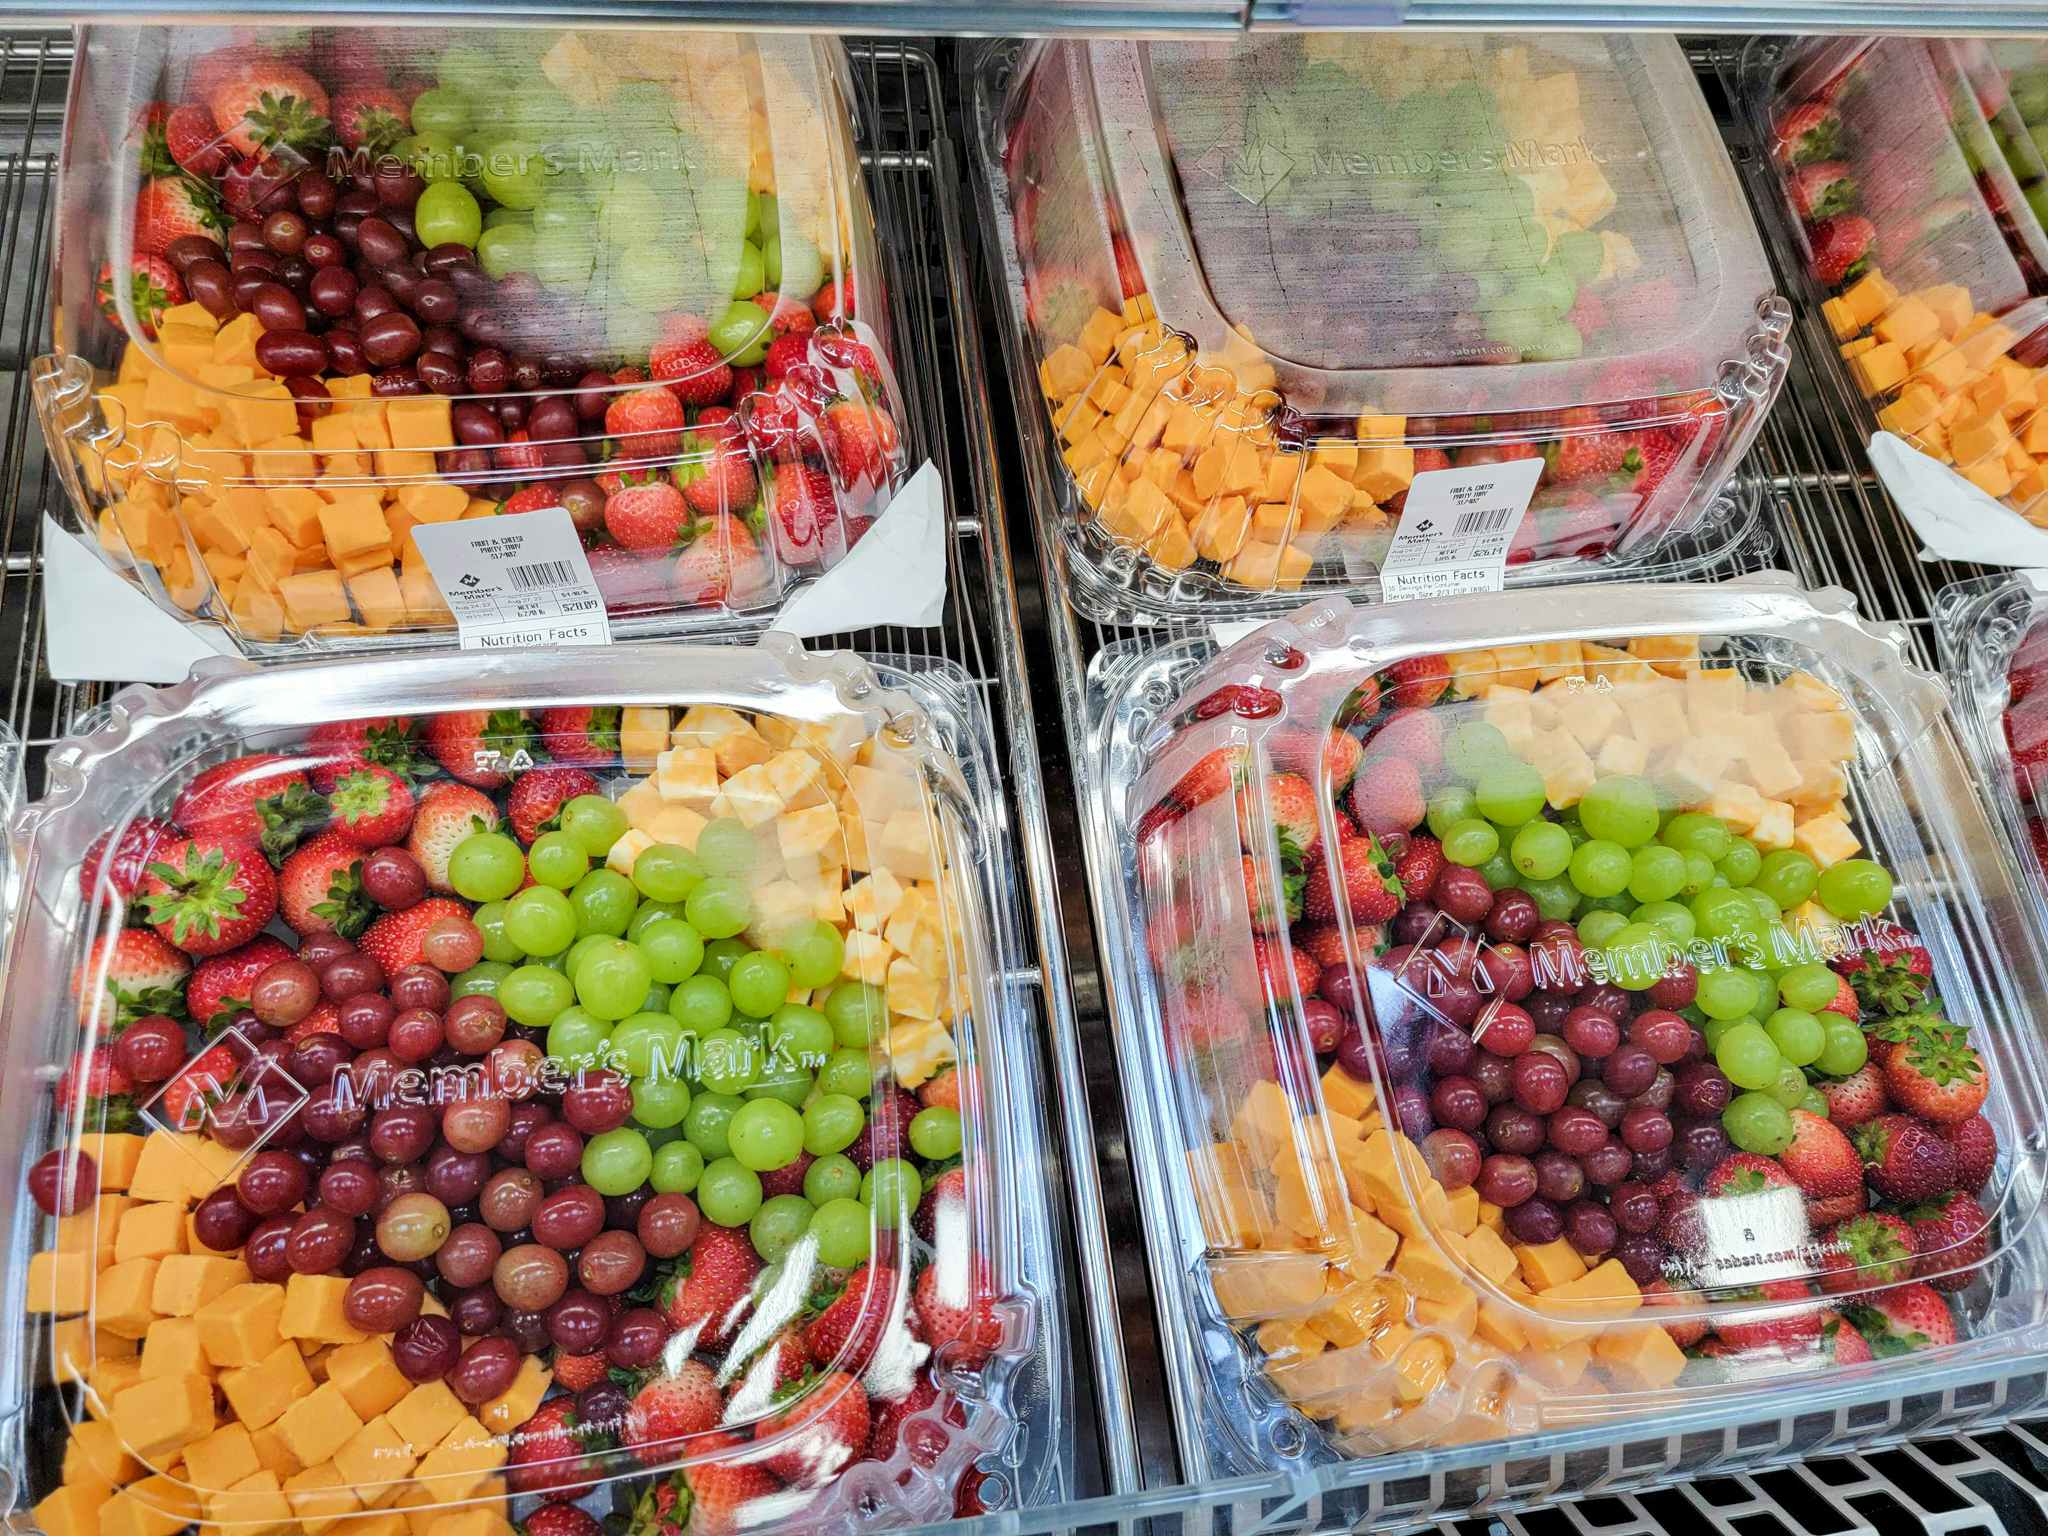 fruit trays with grapes, cheese, strawberries, etc